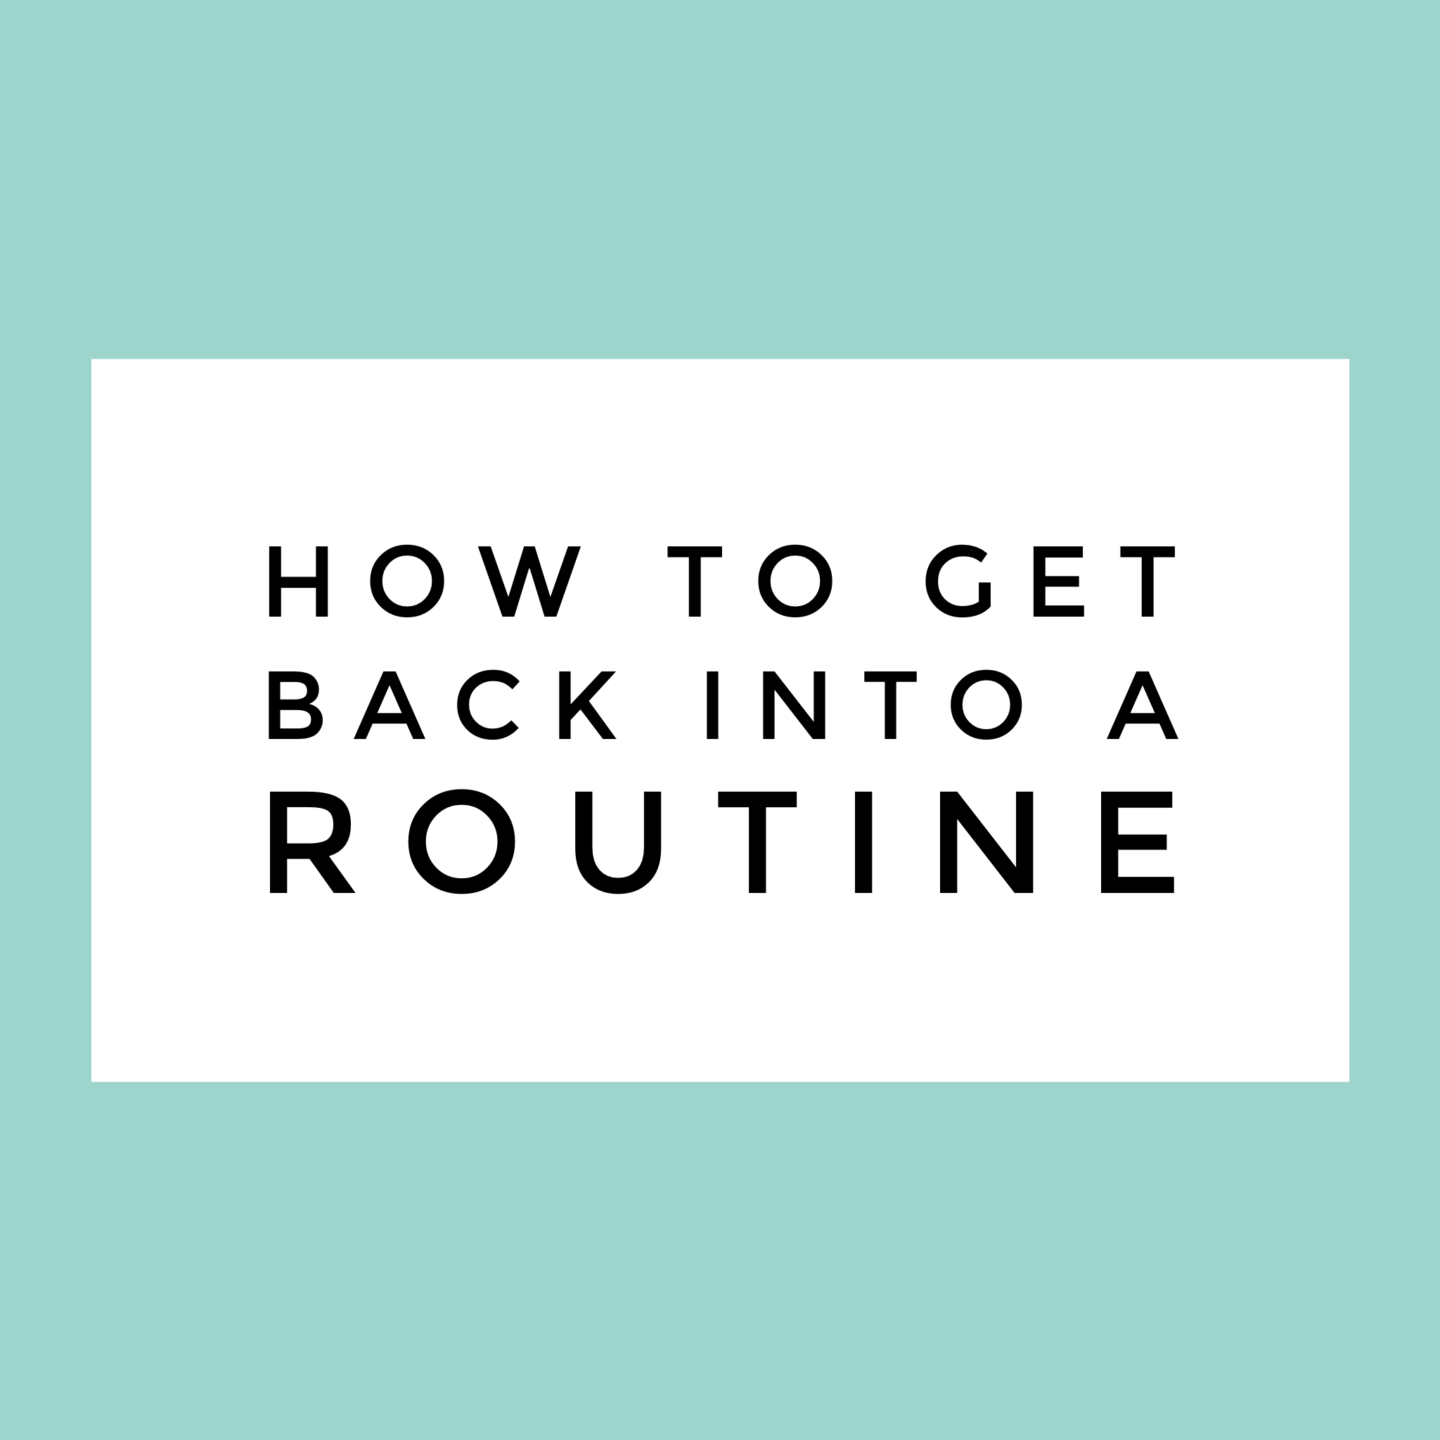 Back into a routine